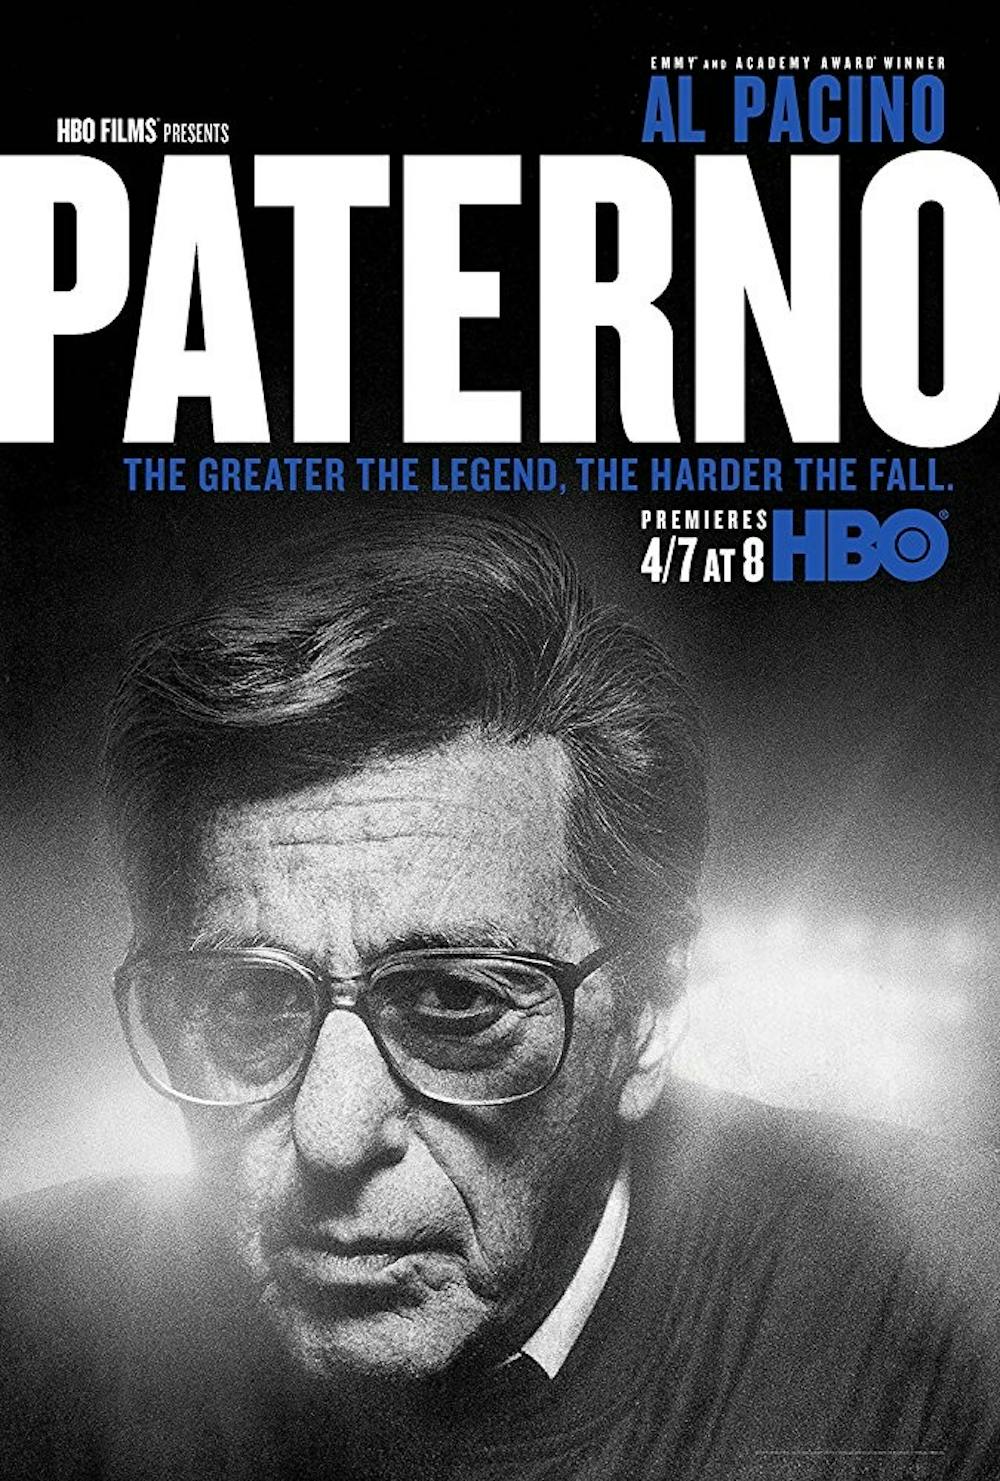 HBO's "Paterno" is a grim, complicated biopic dealing with the life of a Penn State football coach involved in the school's child abuse scandal.